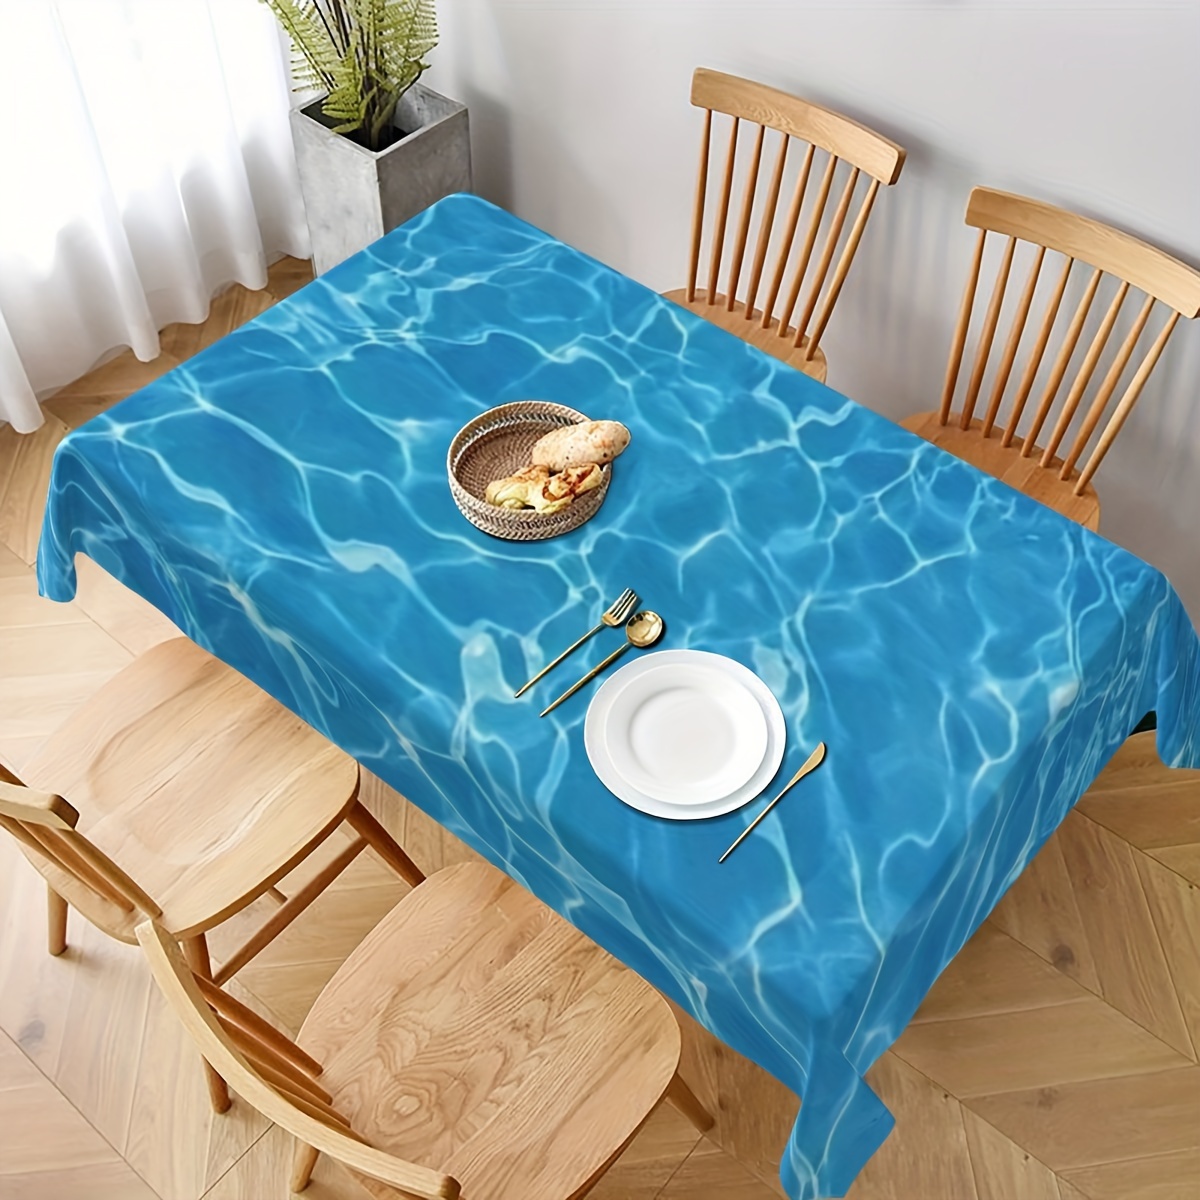 

8-piece Wave Plastic Table Cloth Ocean Table Cloth Hydrographic Table Cloth Ocean Table Cloth Blue Beach Pool Birthday Party Shower Accessories (54 X 108 Inches)